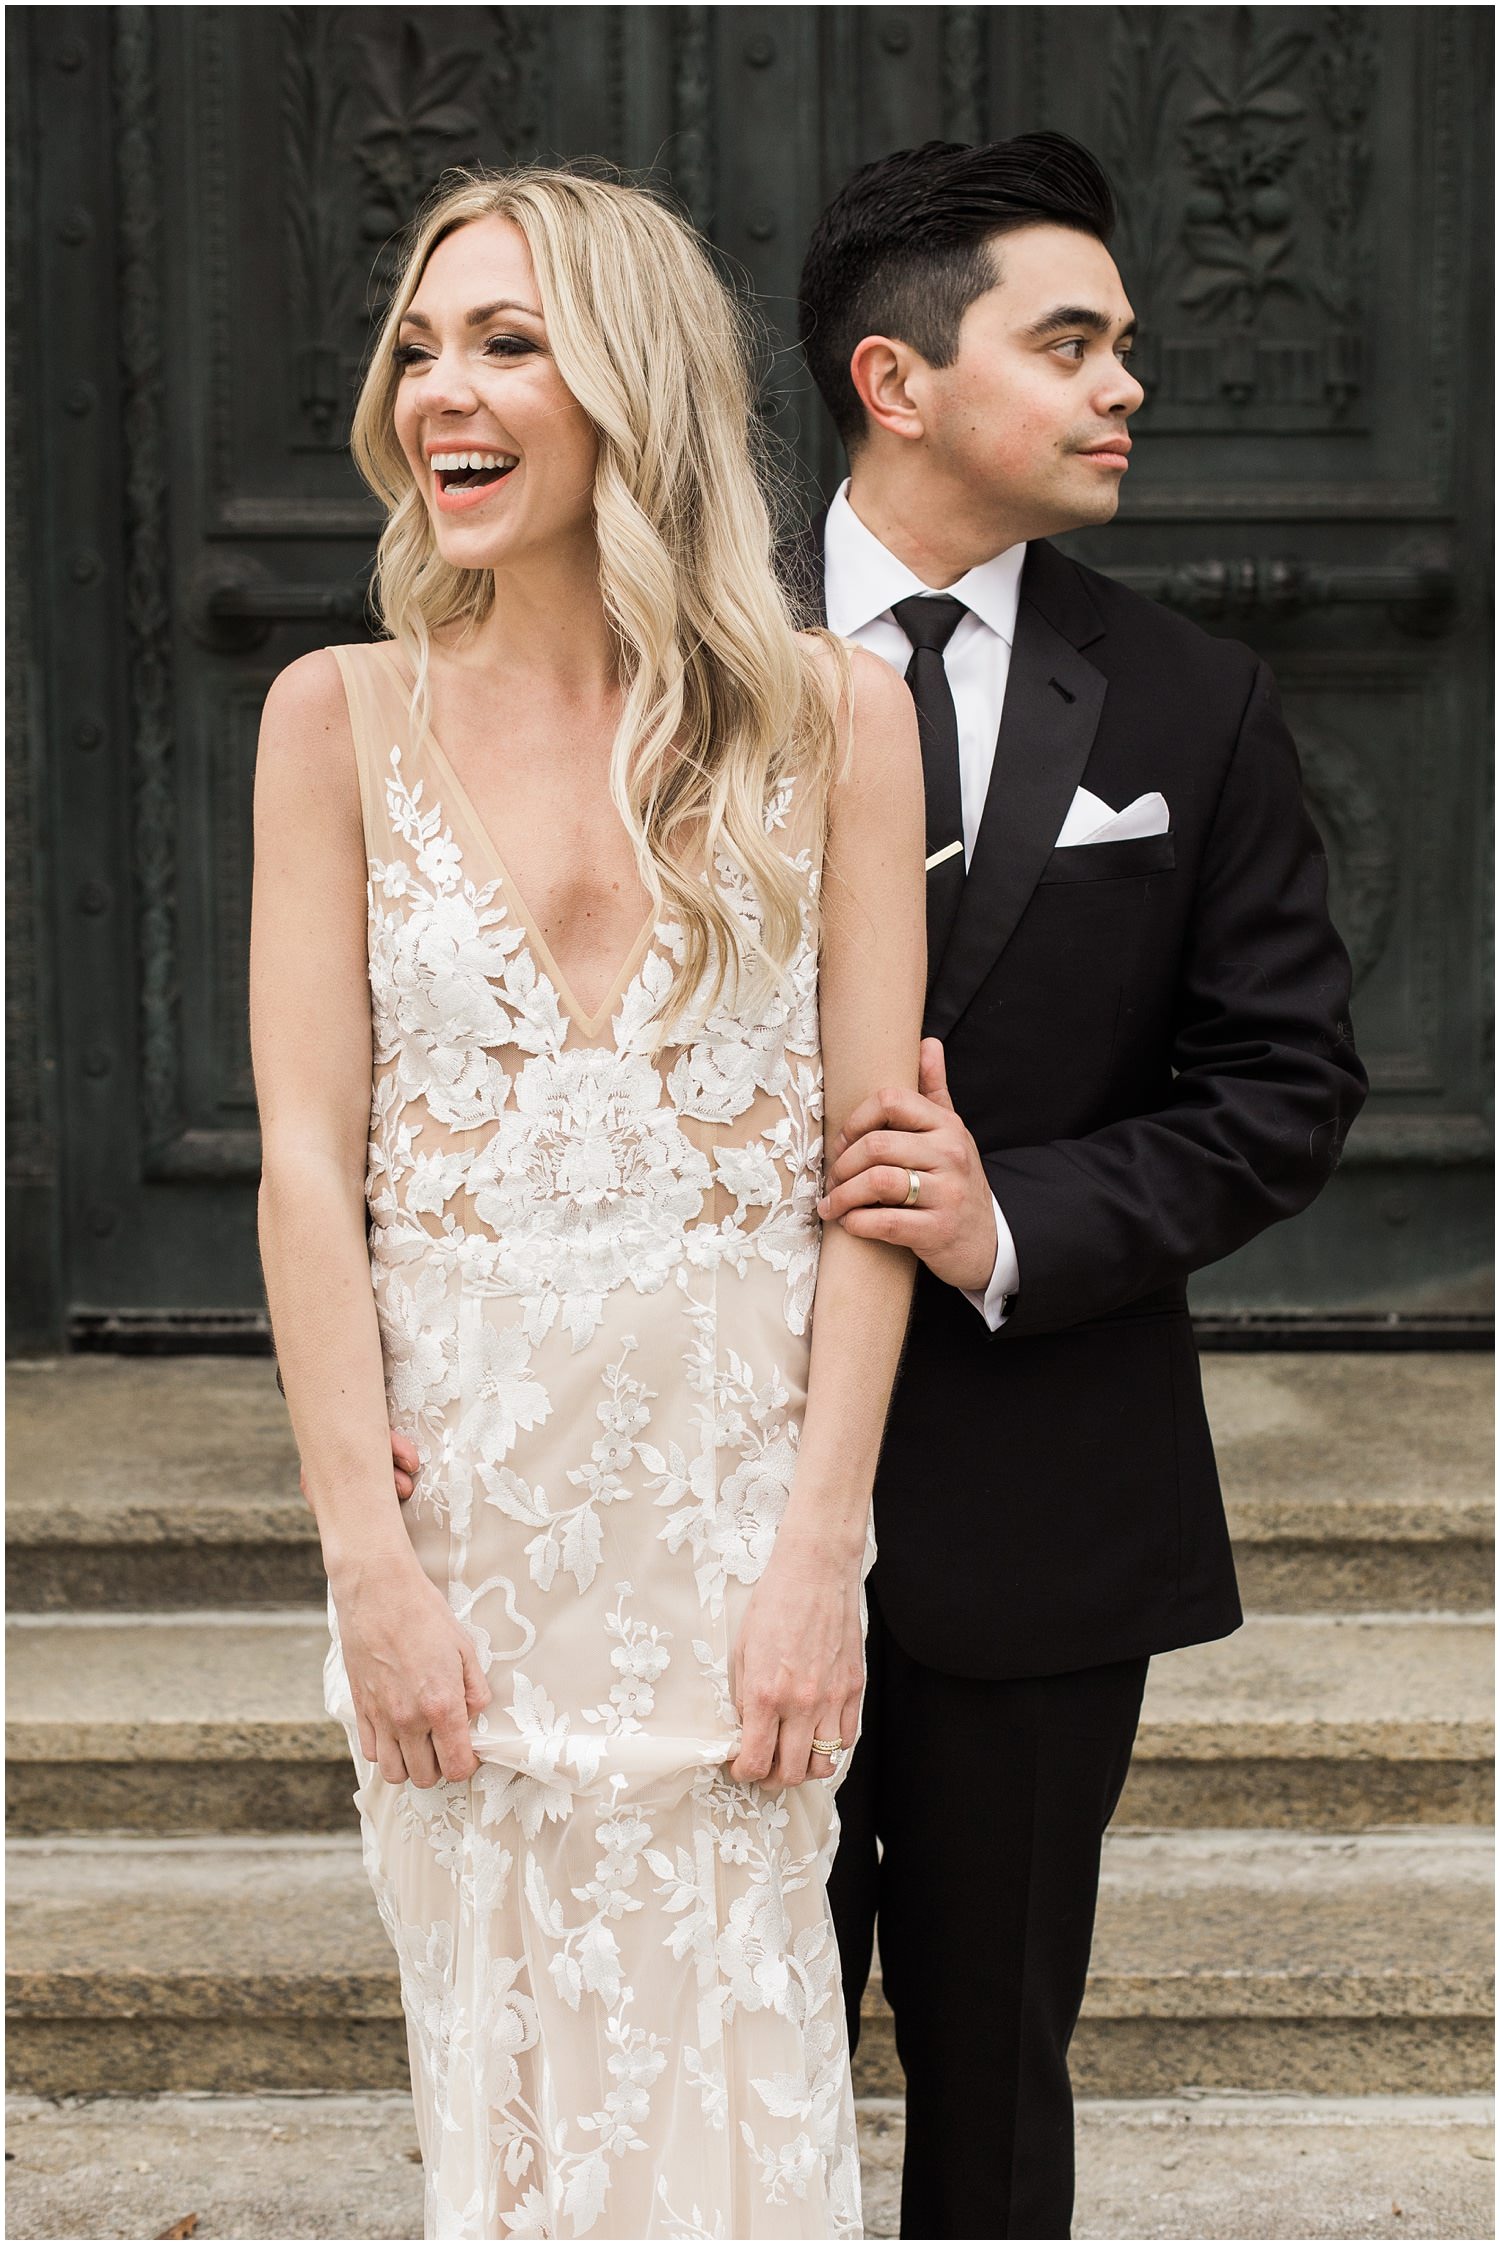 adam lowe photography, wedding, style, love, bride and groom, Cleveland wedding, the black tux, bhldn, perfectly planned by val, made with love bridal, wedding dress, hilton, windows on the river, ohio wedding, columbus